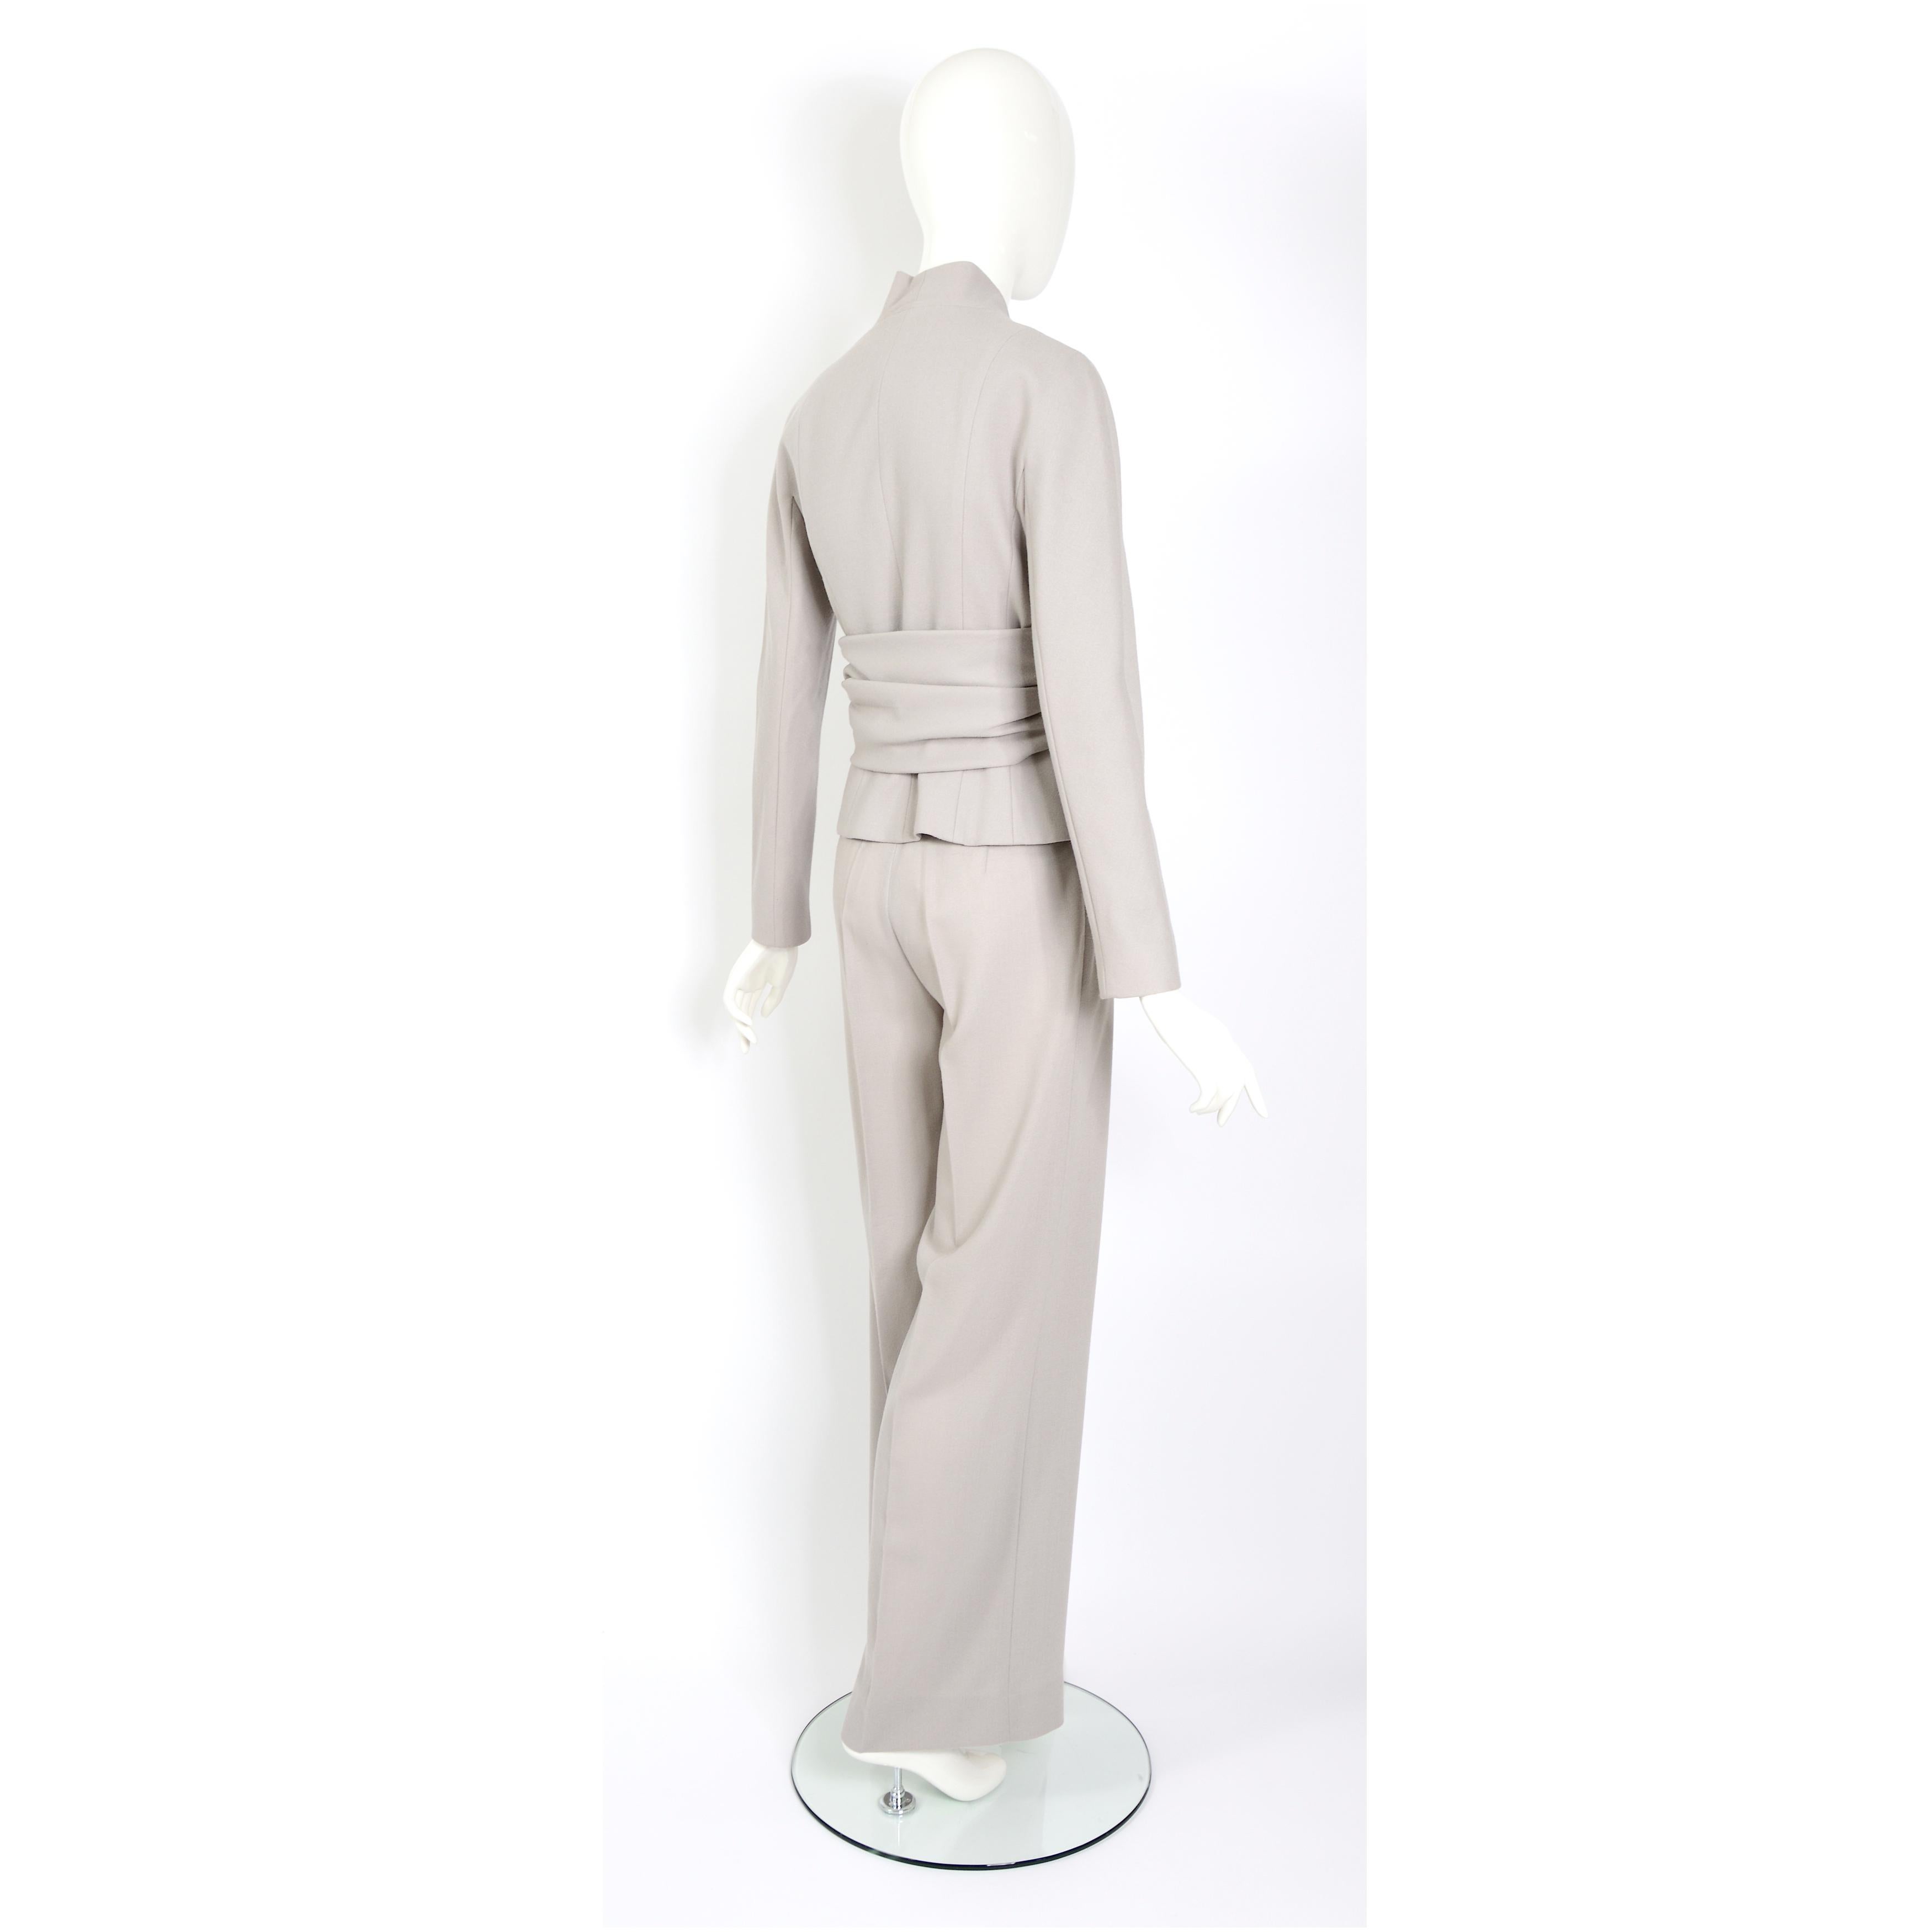 Christian Dior by John Galliano vintage 2008 ready to wear suit For Sale 2